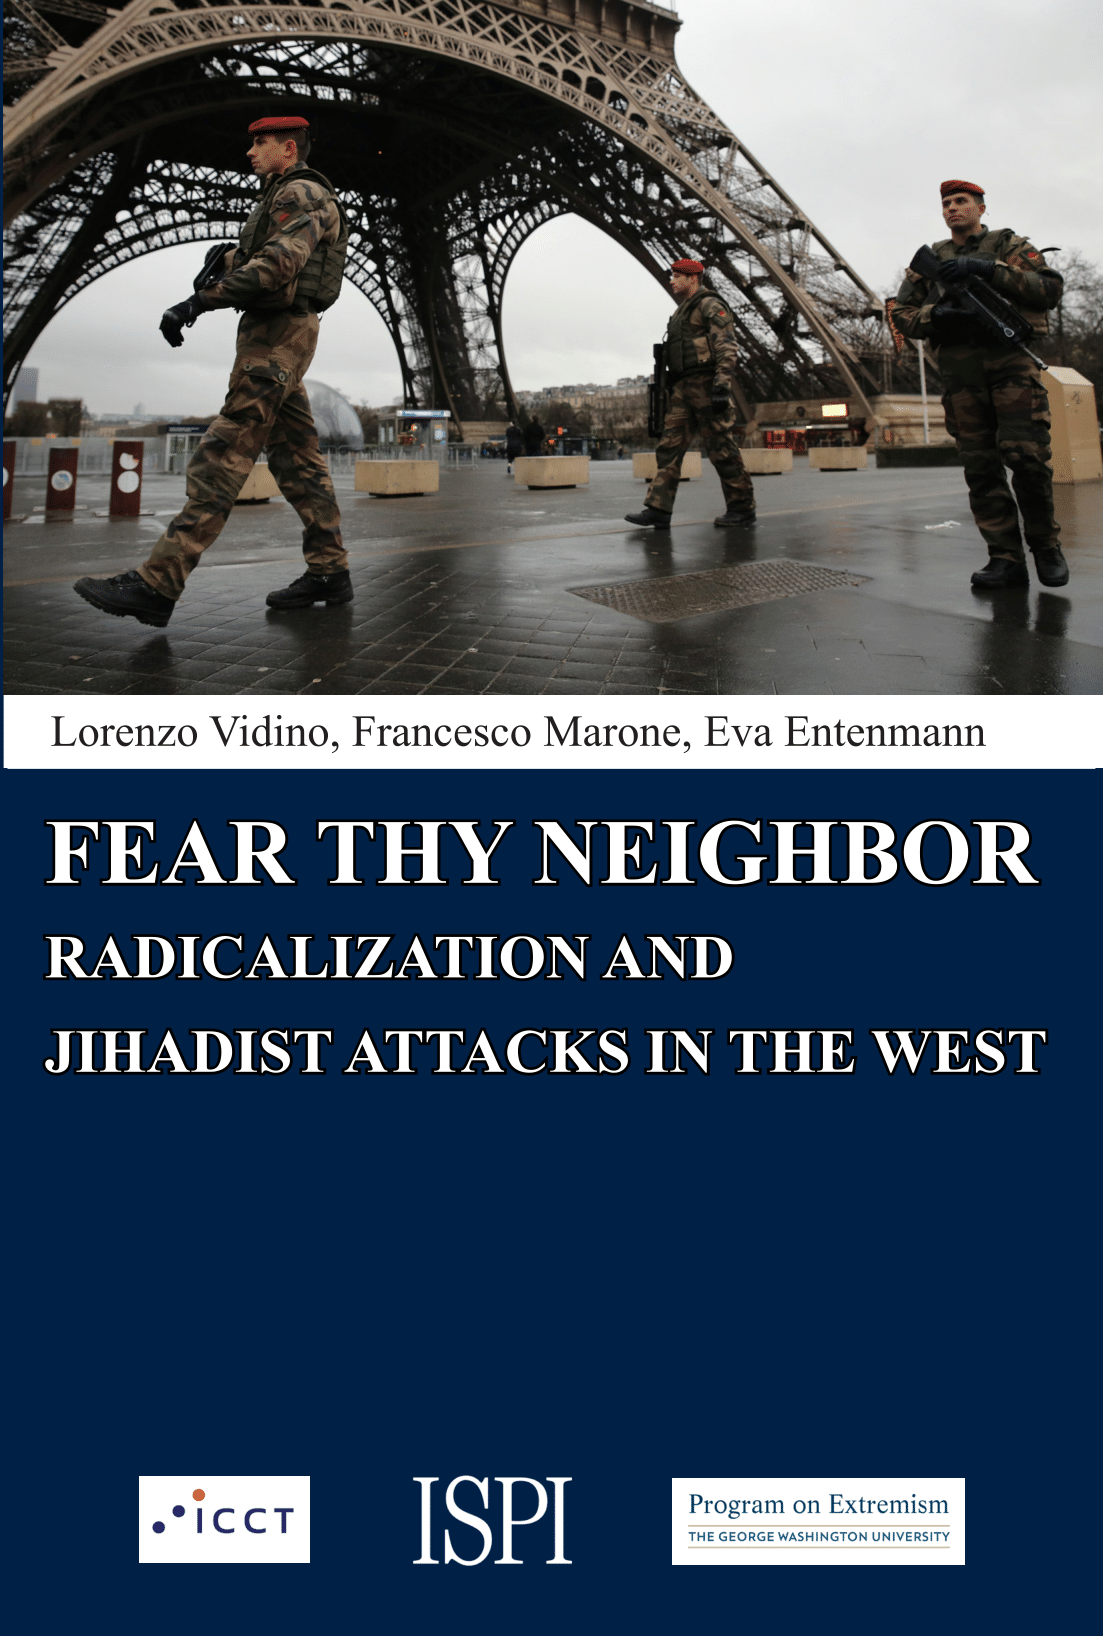 Fear Thy Neighbor: Radicalization and Jihadist Attacks in the West